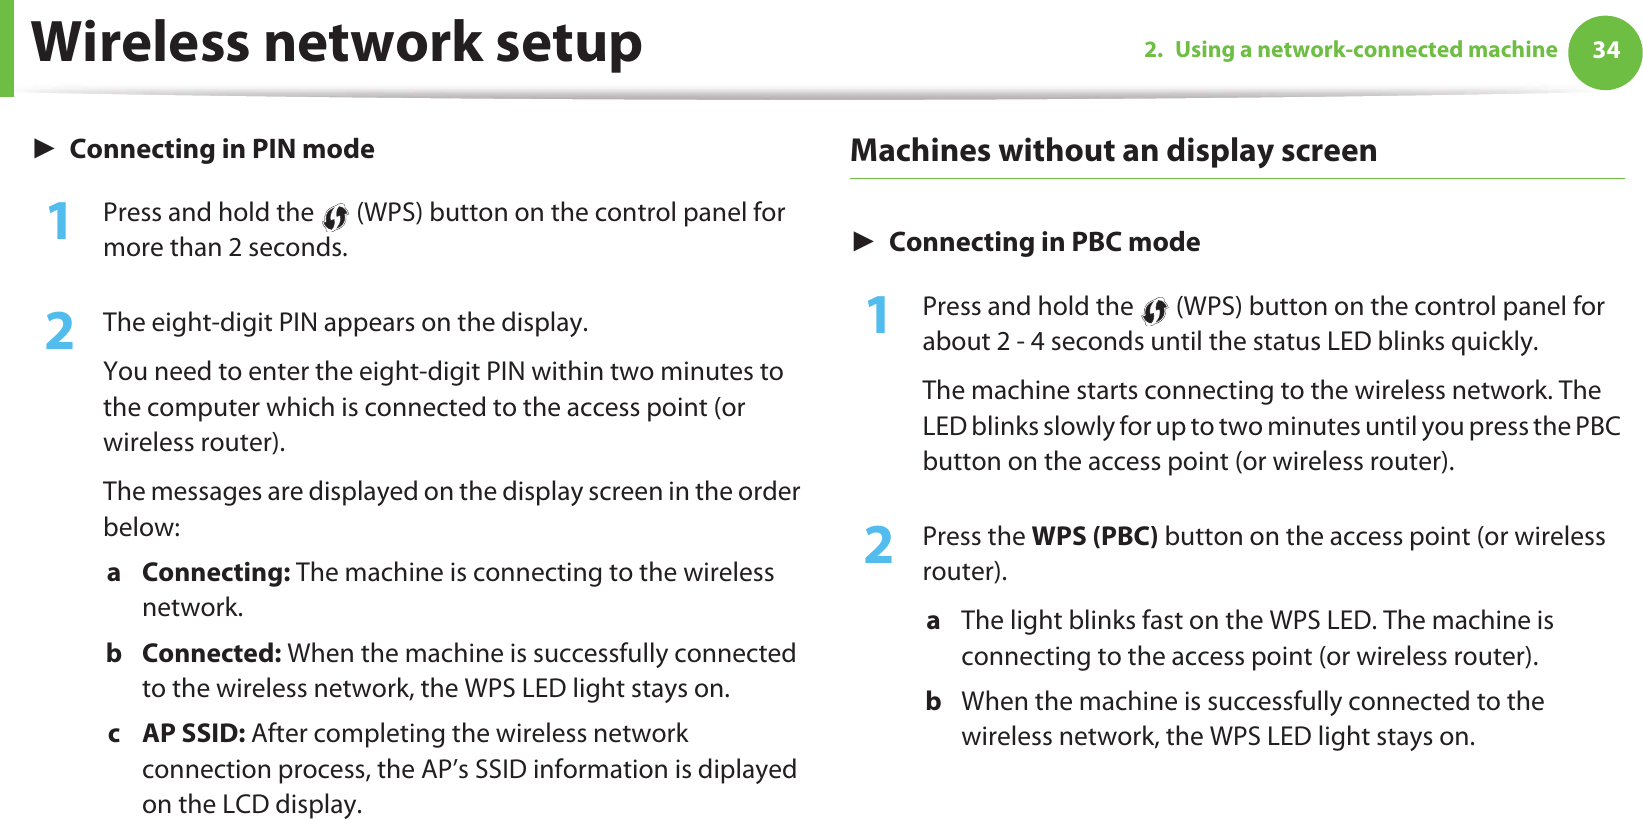 Wireless network setup 342. Using a network-connected machineŹConnecting in PIN mode1Press and hold the   (WPS) button on the control panel for more than 2 seconds.2  The eight-digit PIN appears on the display. You need to enter the eight-digit PIN within two minutes to the computer which is connected to the access point (or wireless router).The messages are displayed on the display screen in the order below:a Connecting: The machine is connecting to the wireless network.b Connected: When the machine is successfully connected to the wireless network, the WPS LED light stays on.c AP SSID: After completing the wireless network connection process, the AP’s SSID information is diplayed on the LCD display.Machines without an display screenŹConnecting in PBC mode1Press and hold the   (WPS) button on the control panel for about 2 - 4 seconds until the status LED blinks quickly.The machine starts connecting to the wireless network. The LED blinks slowly for up to two minutes until you press the PBC button on the access point (or wireless router).2  Press the WPS (PBC) button on the access point (or wireless router).a  The light blinks fast on the WPS LED. The machine is connecting to the access point (or wireless router). b  When the machine is successfully connected to the wireless network, the WPS LED light stays on.